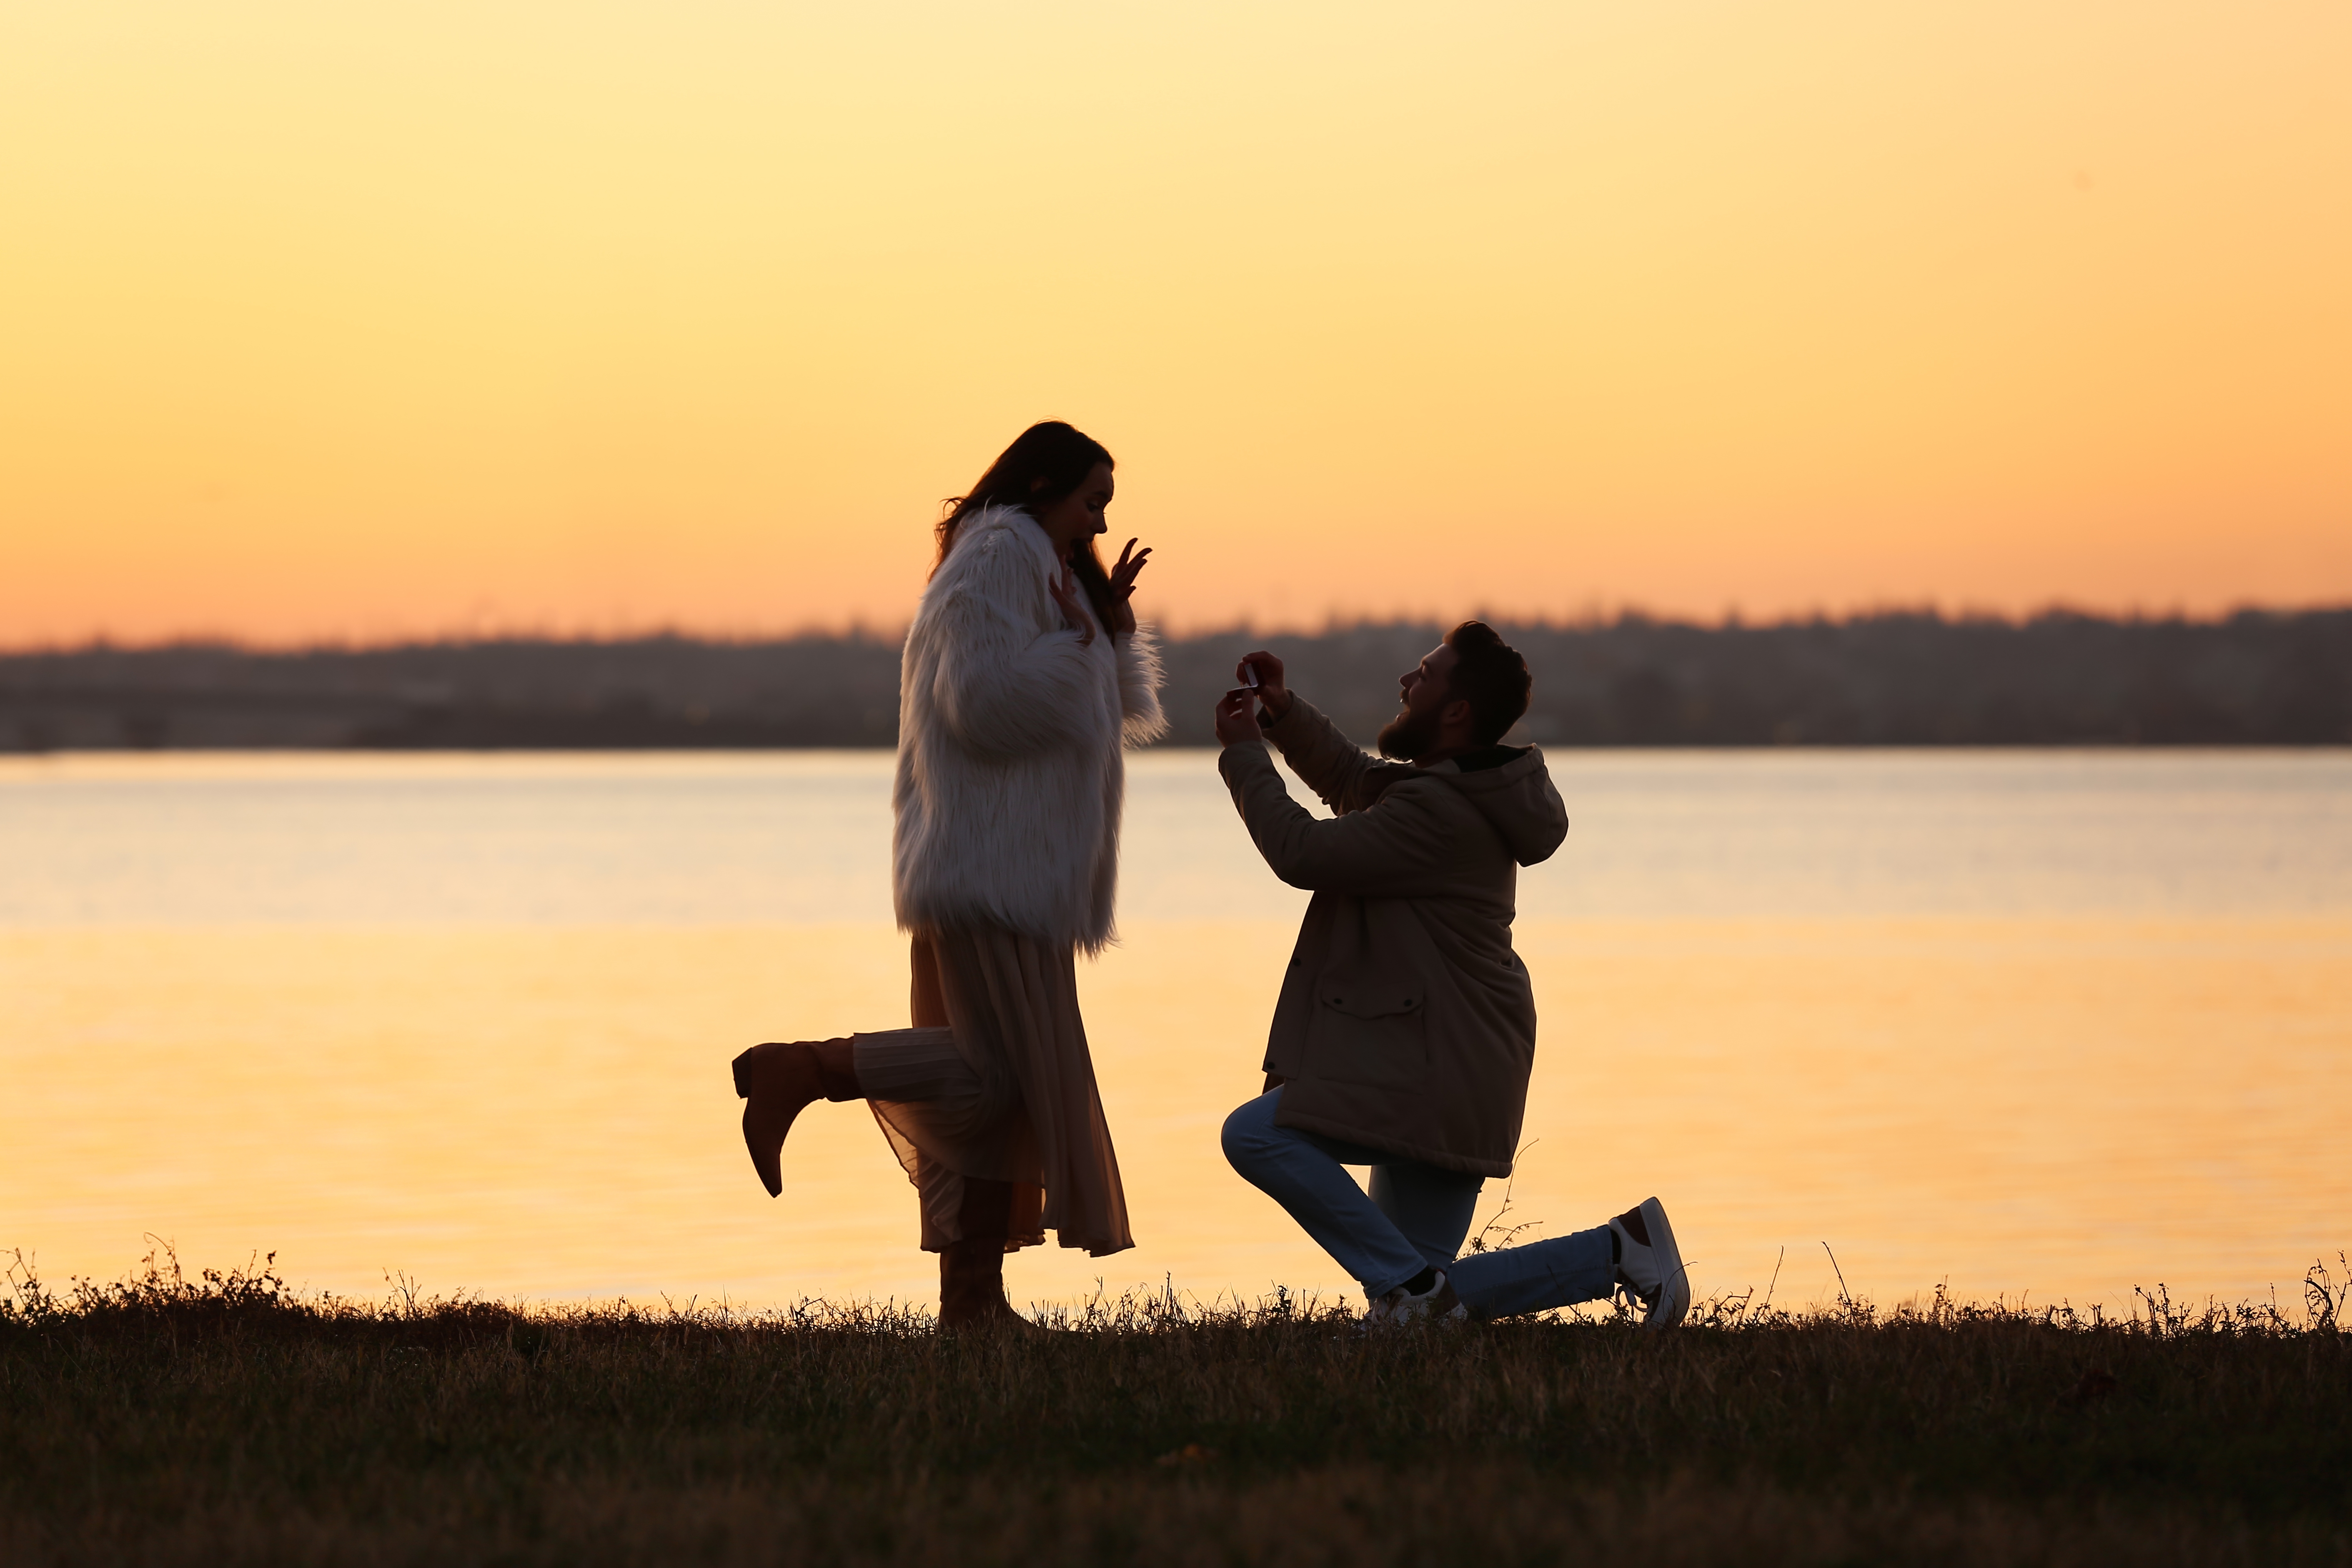 Young man proposing to his girlfriend near river at sunset. | Source: Shutterstock